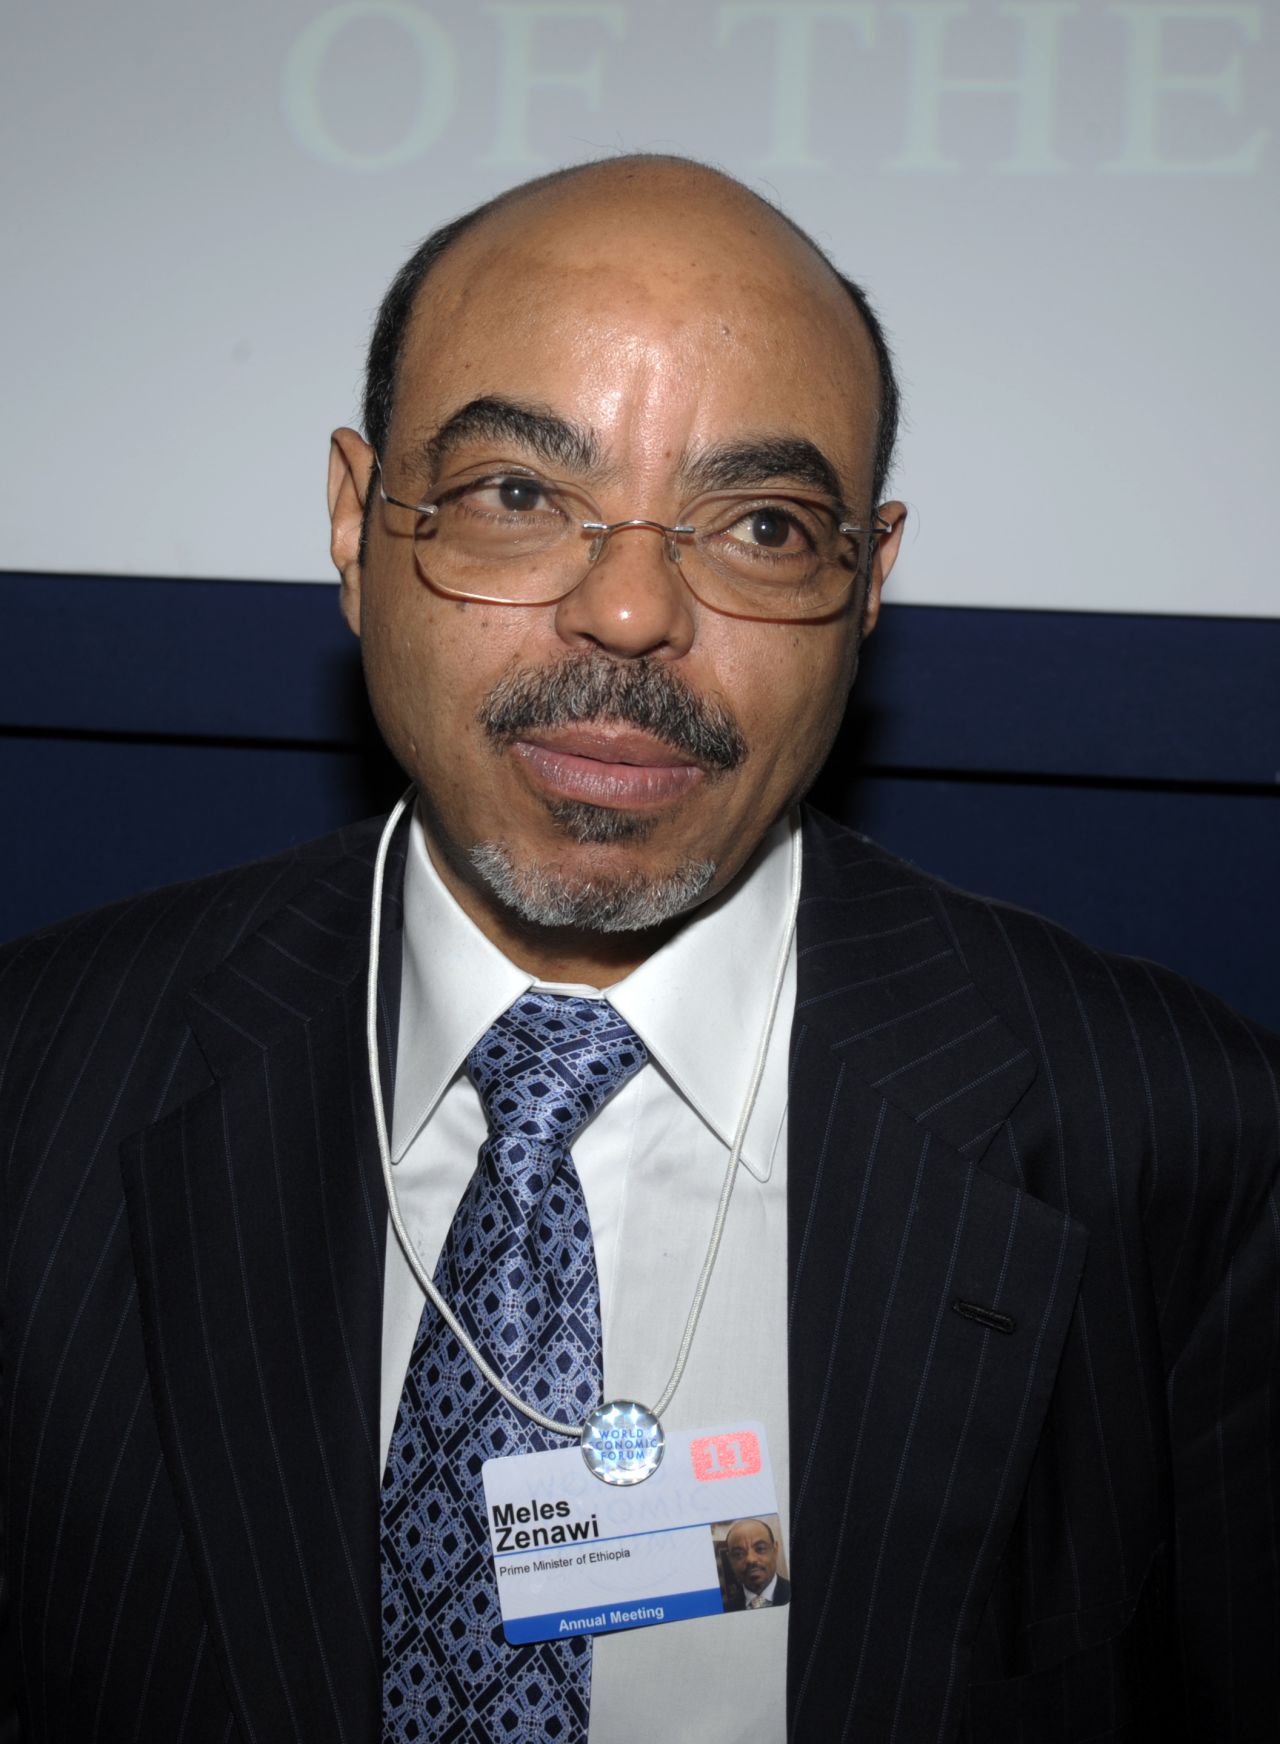 Ethiopian Prime Minister <a href="http://www.cnn.com/2012/08/21/world/africa/ethiopia-prime-minister-dead/index.html">Meles Zenawi</a>, a strongman in the troubled Horn of Africa and a key United States ally, died on August 20 at the age of 57.